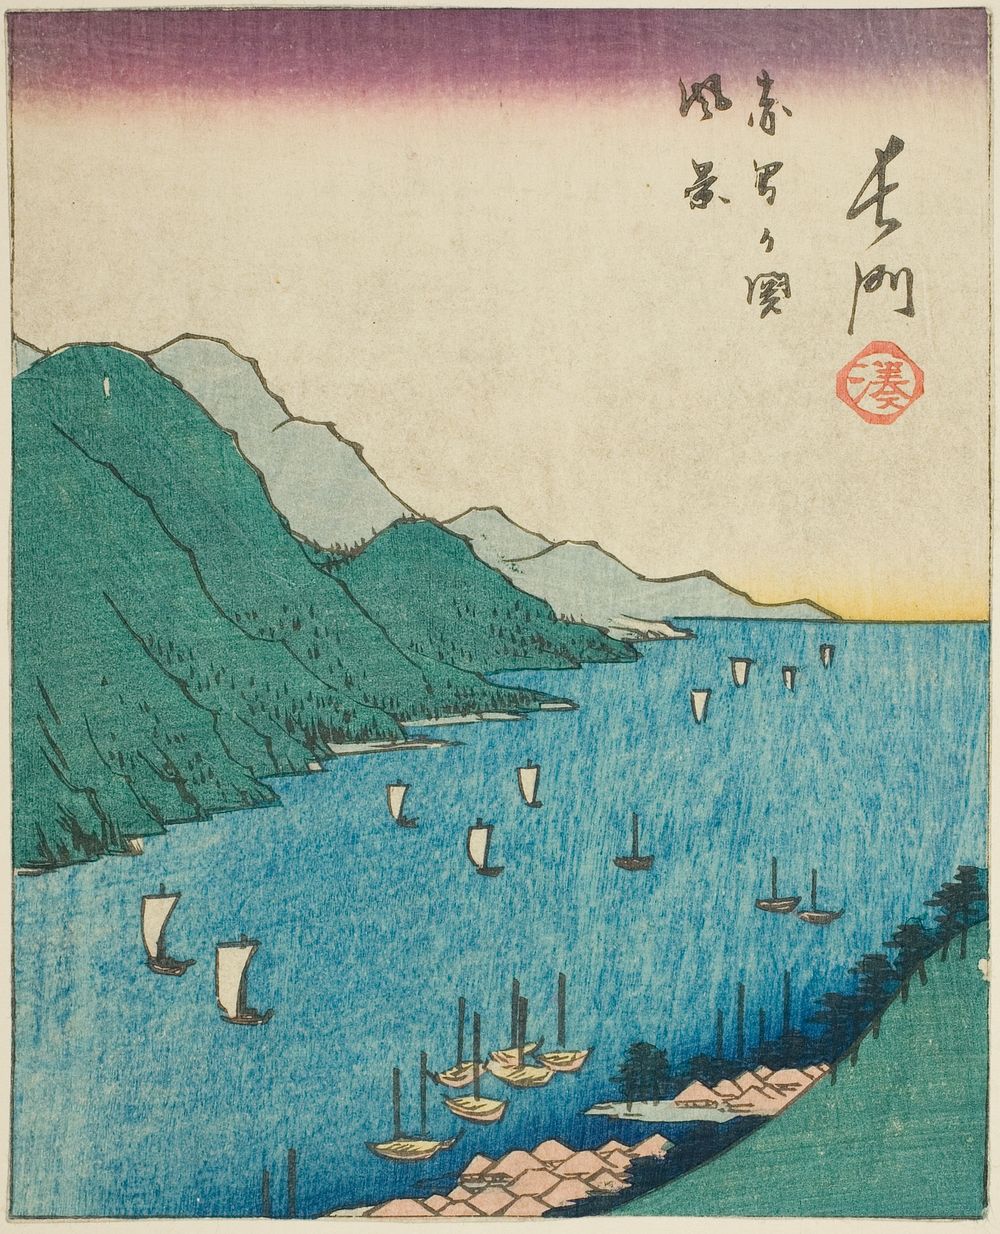 Nagato, section of sheet no. 15 from the series "Cutout Pictures of the Provinces (Kunizukushi harimaze zue)" by Utagawa…